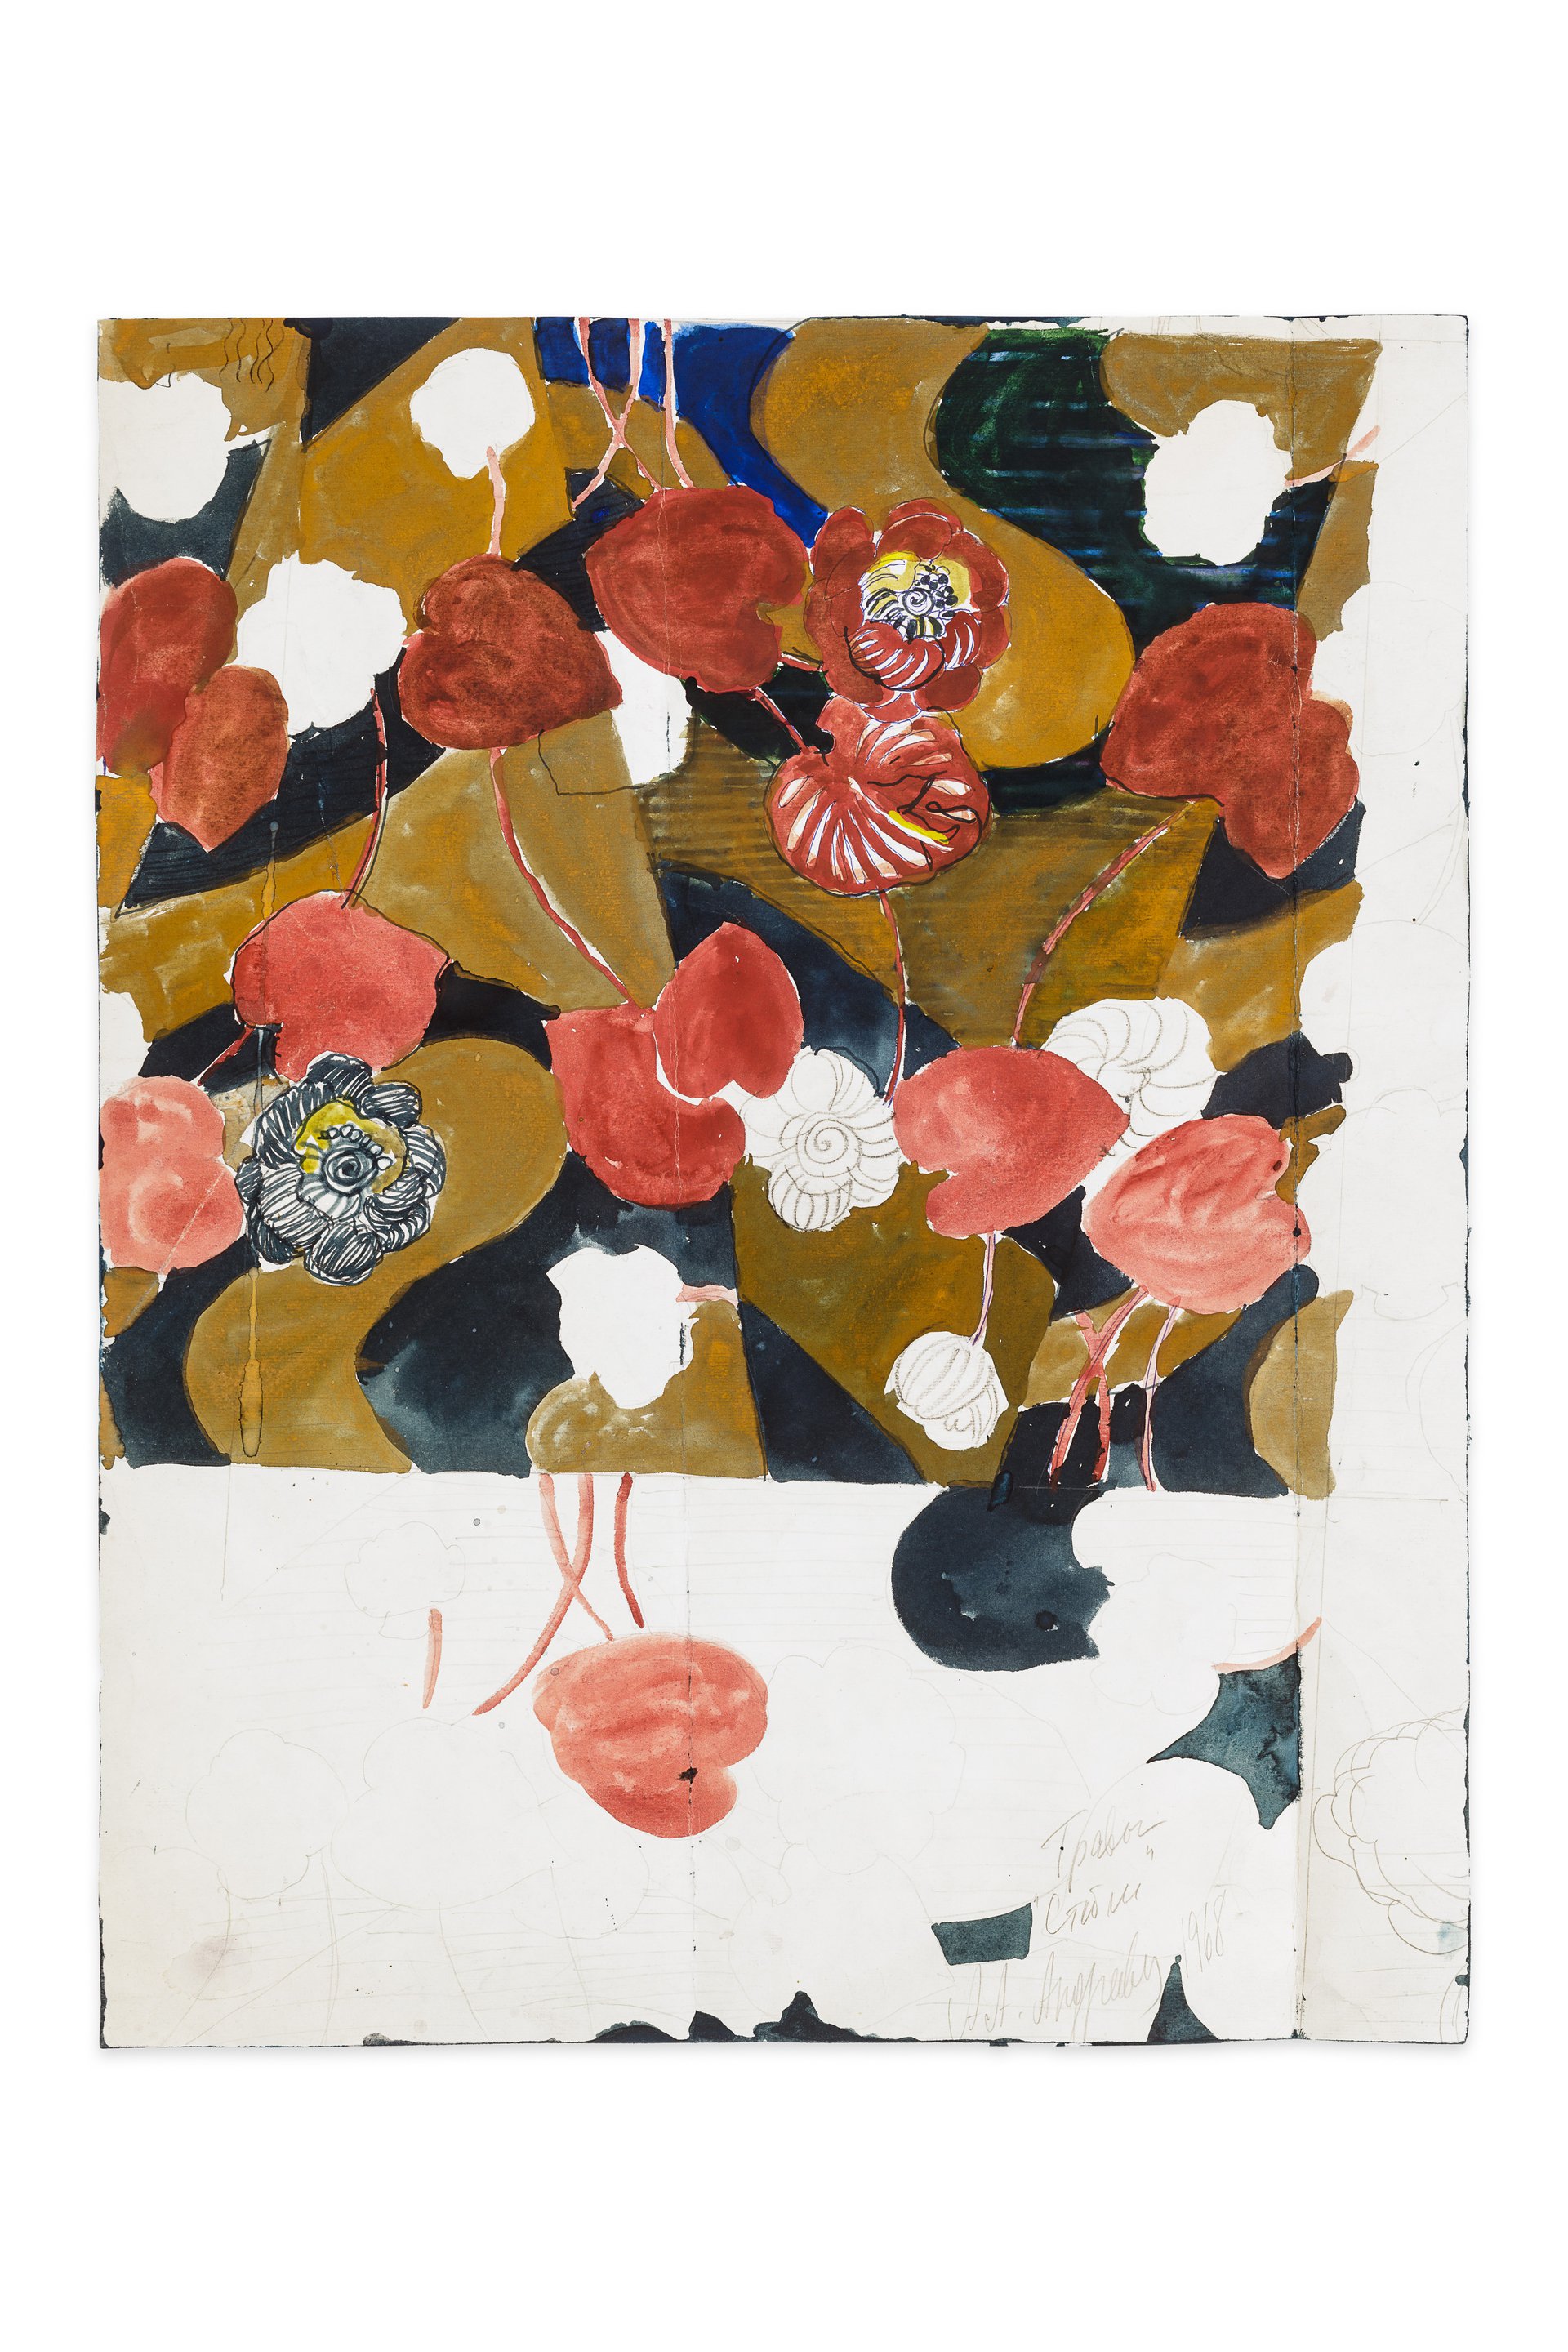 Anna AndreevaThe Herbs, 1968 (verso)Ink, gouache and pencil on paper54,5 x 43 cm